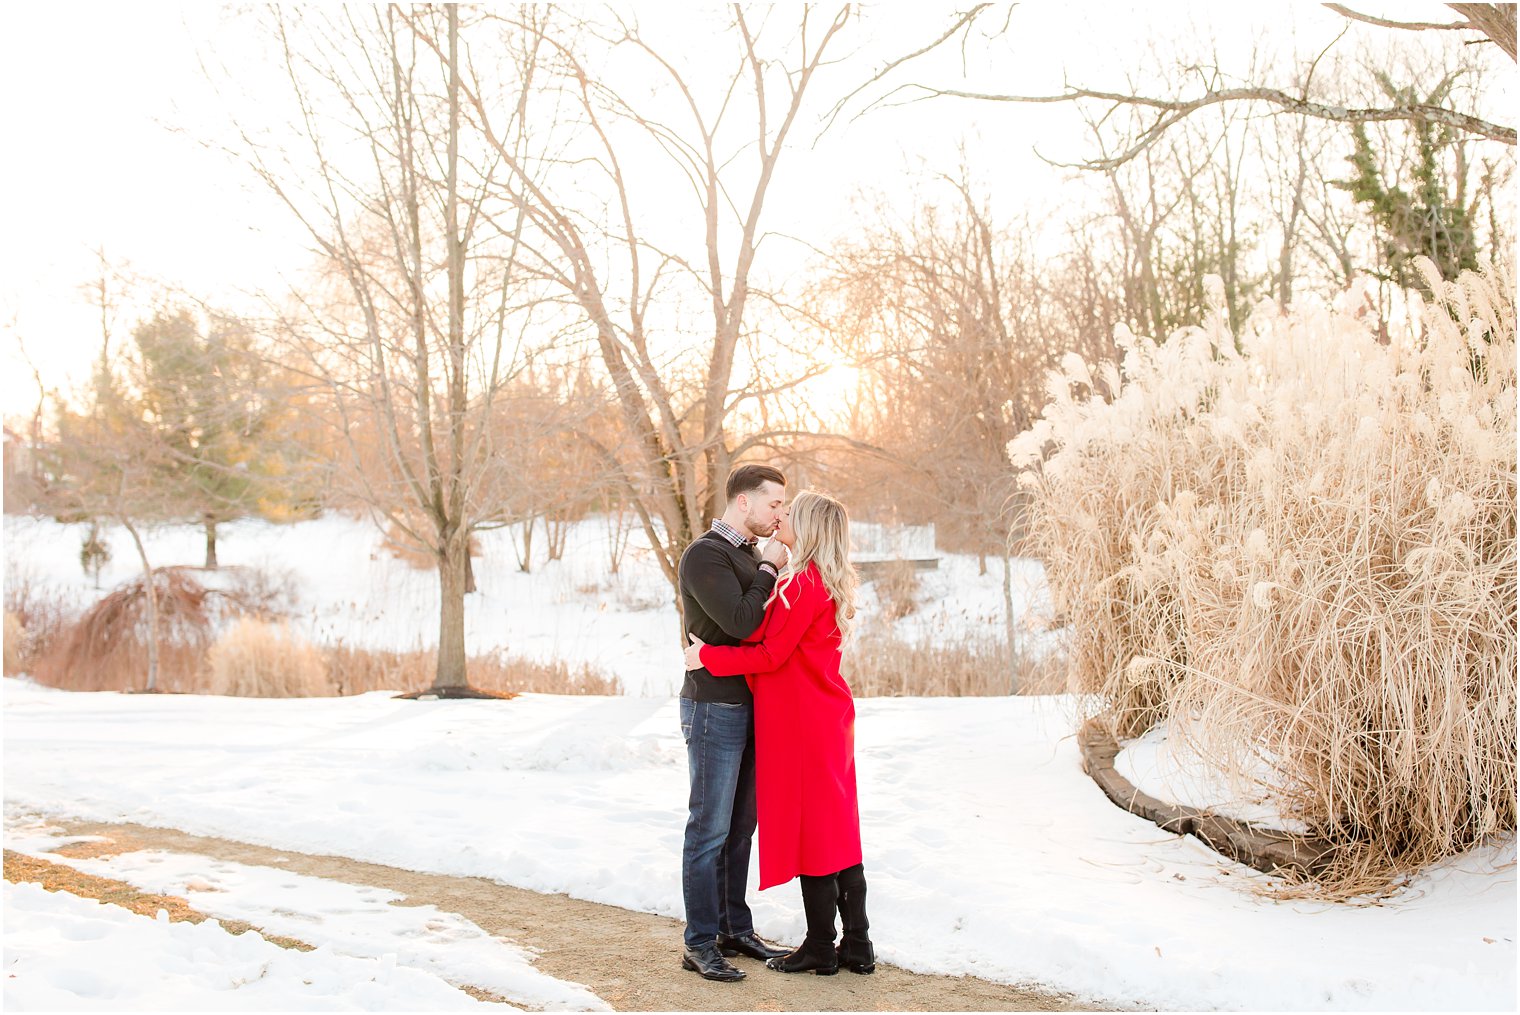 Sunset portrait of engaged couple in the snow